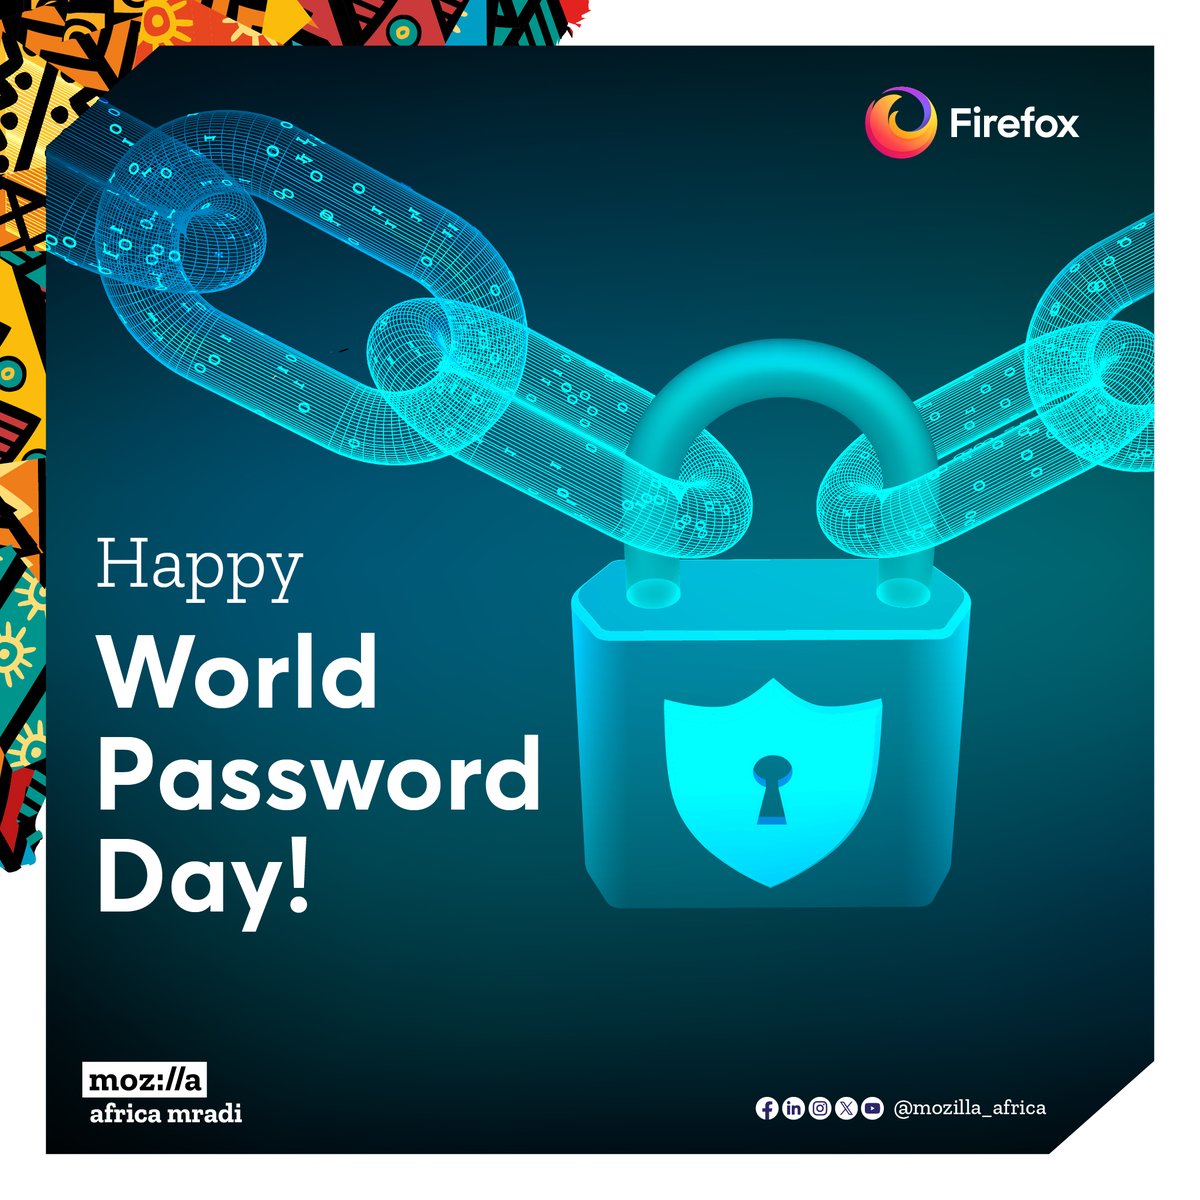 Every 39 seconds, a new web attack occurs - that's 2,244 daily! On #WorldPasswordDay, remember: strong, unique passwords for each account are crucial for a healthy internet. Fortify your digital defenses and surf with confidence! 

#MozillaAfricaMradi #Firefox #OnlineSafety